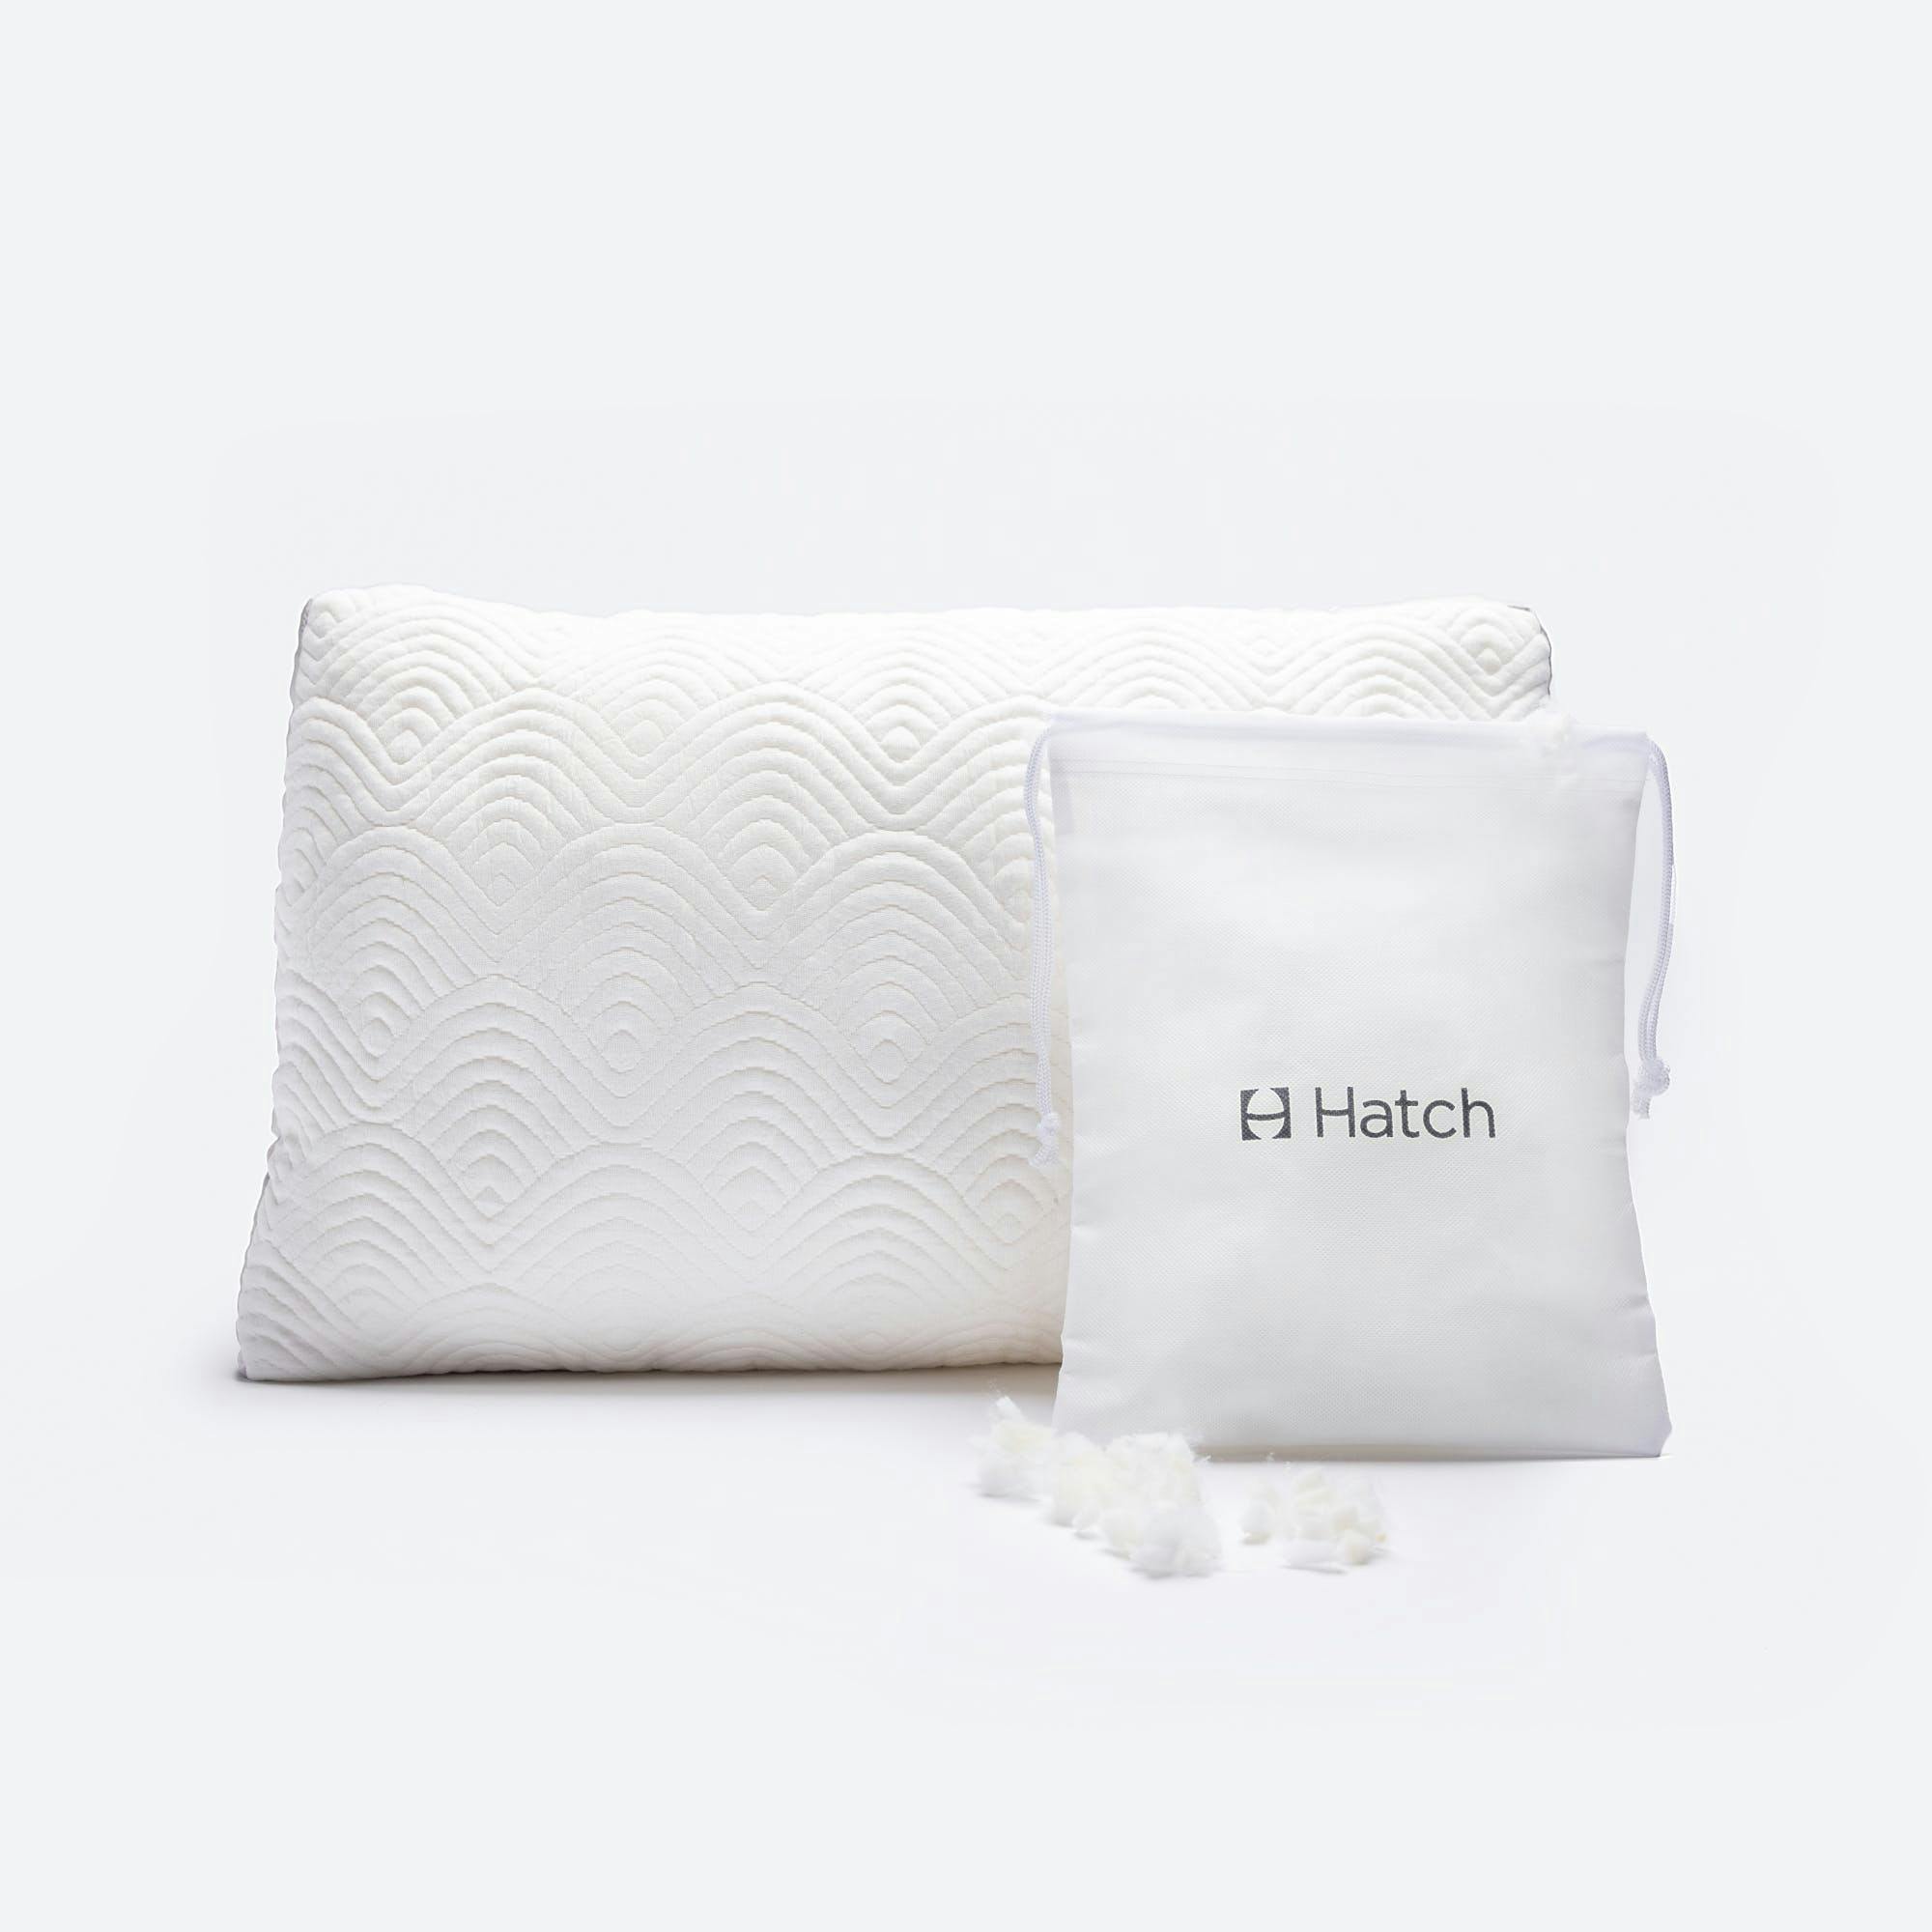 Hatch Cloud Pillow in protective cover and bag